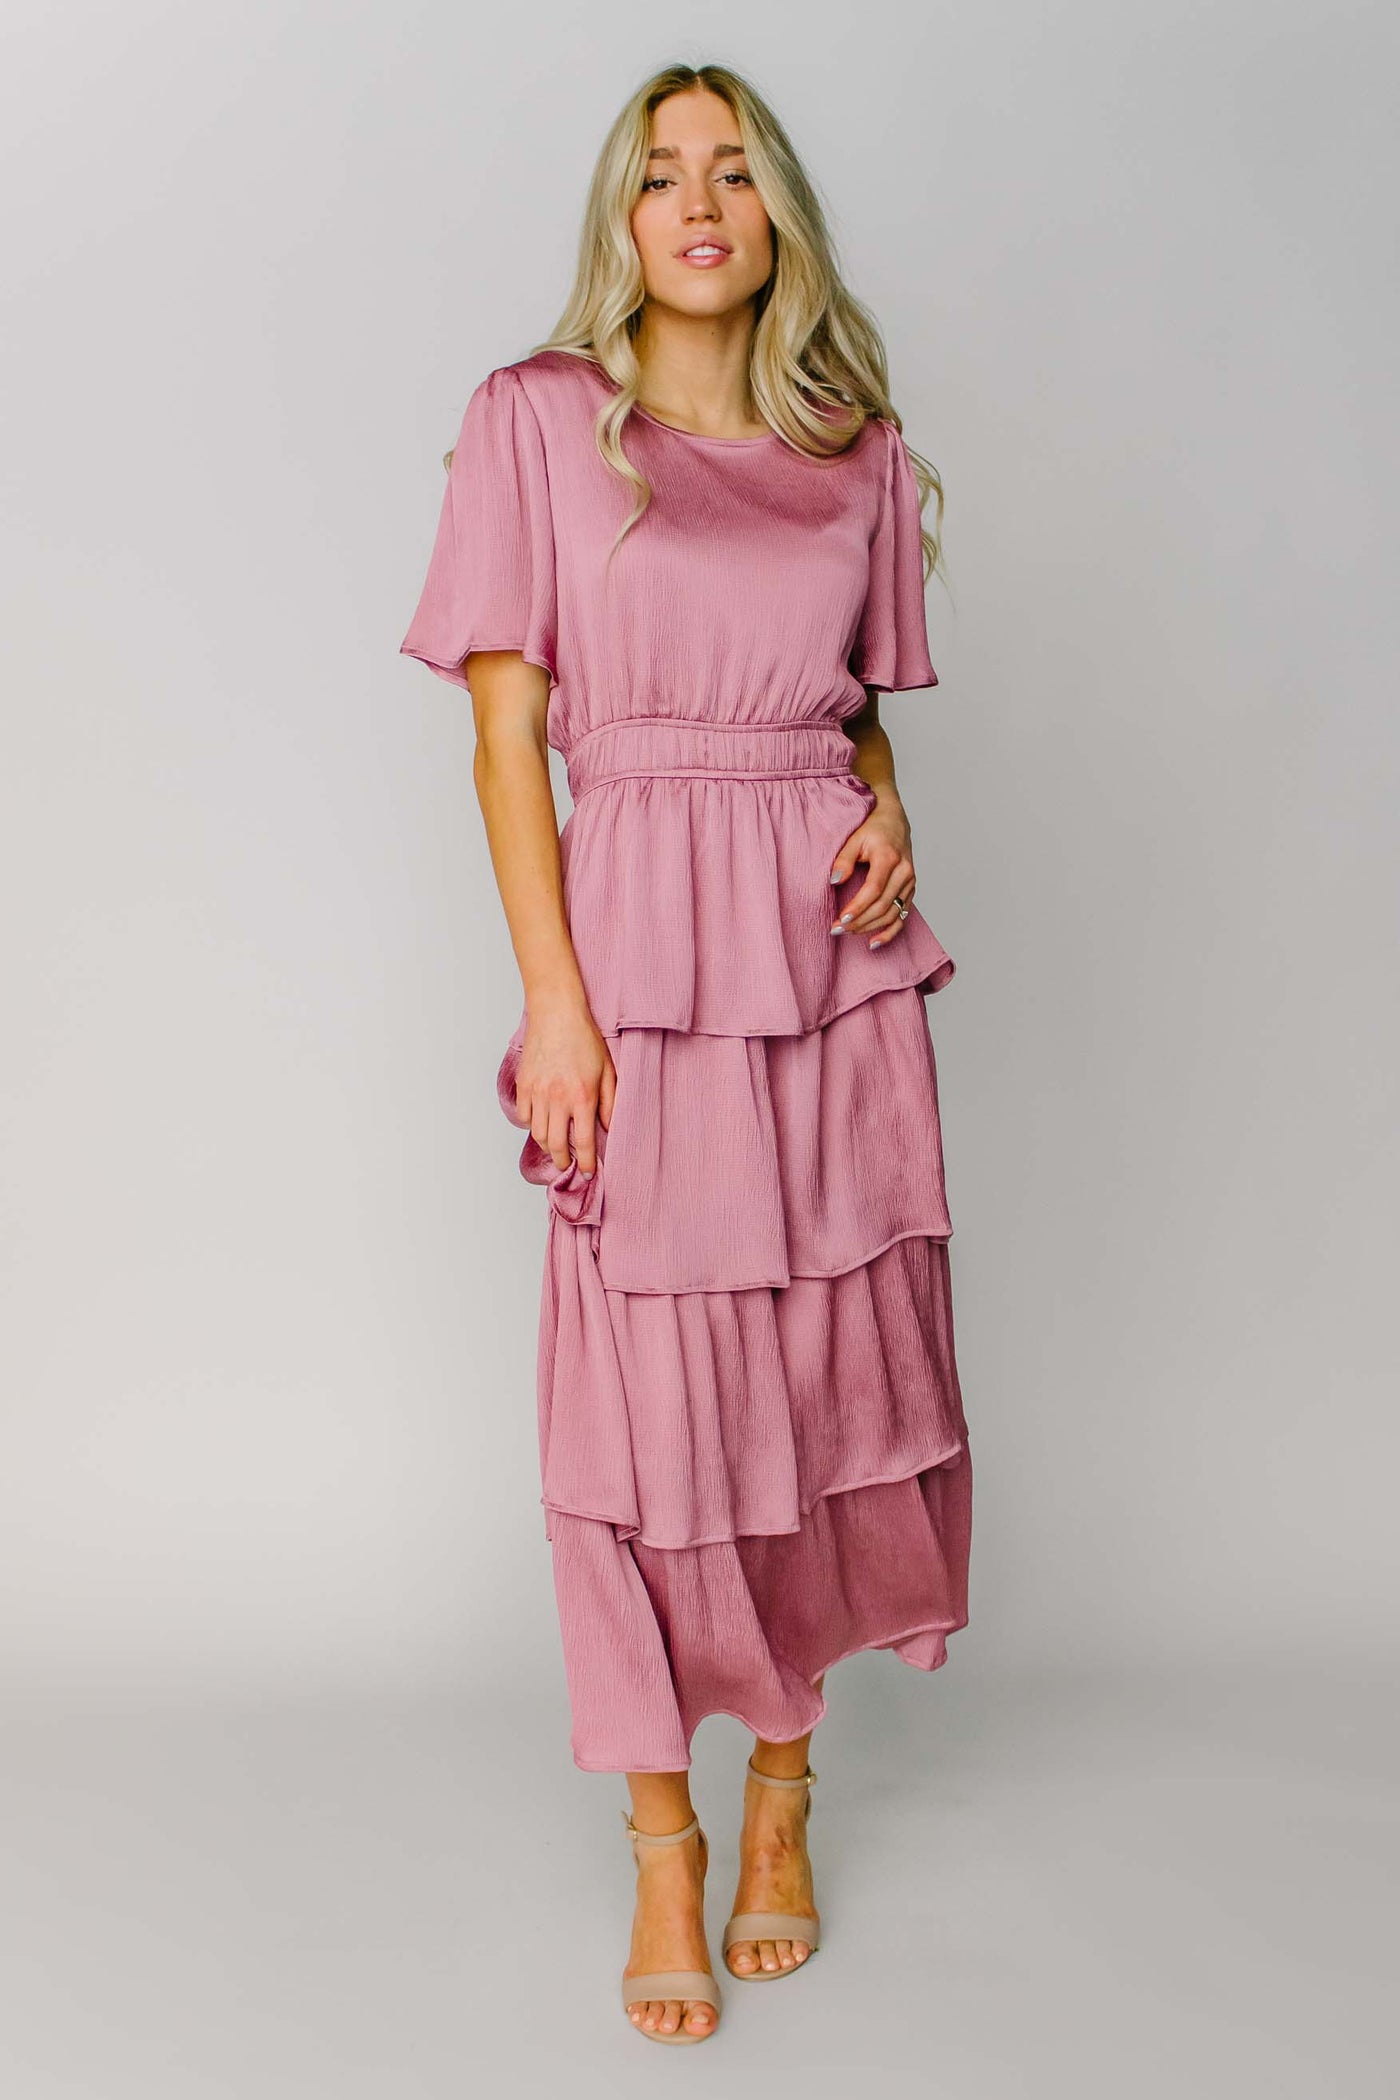 A modest bridesmaid dress made out of a silky pink fabric with flutter sleeves, layered tiers, and a defined waist.